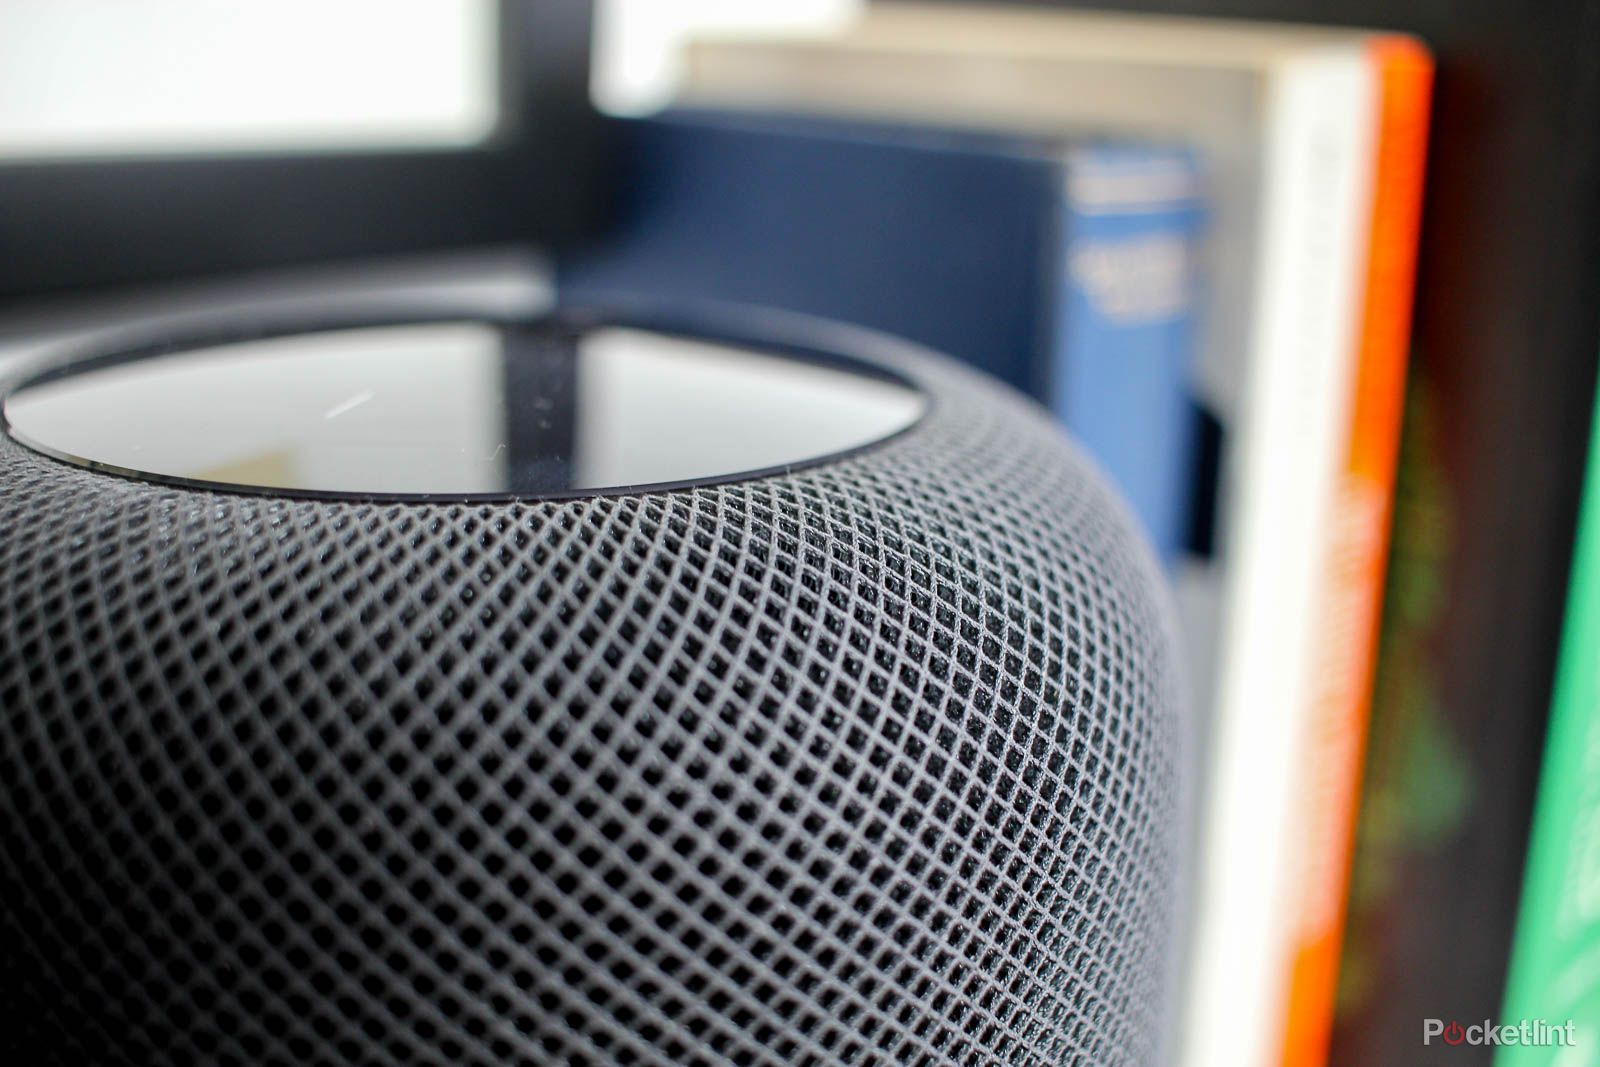 Repairing your Apple HomePod costs almost as much as a new HomePod image 1